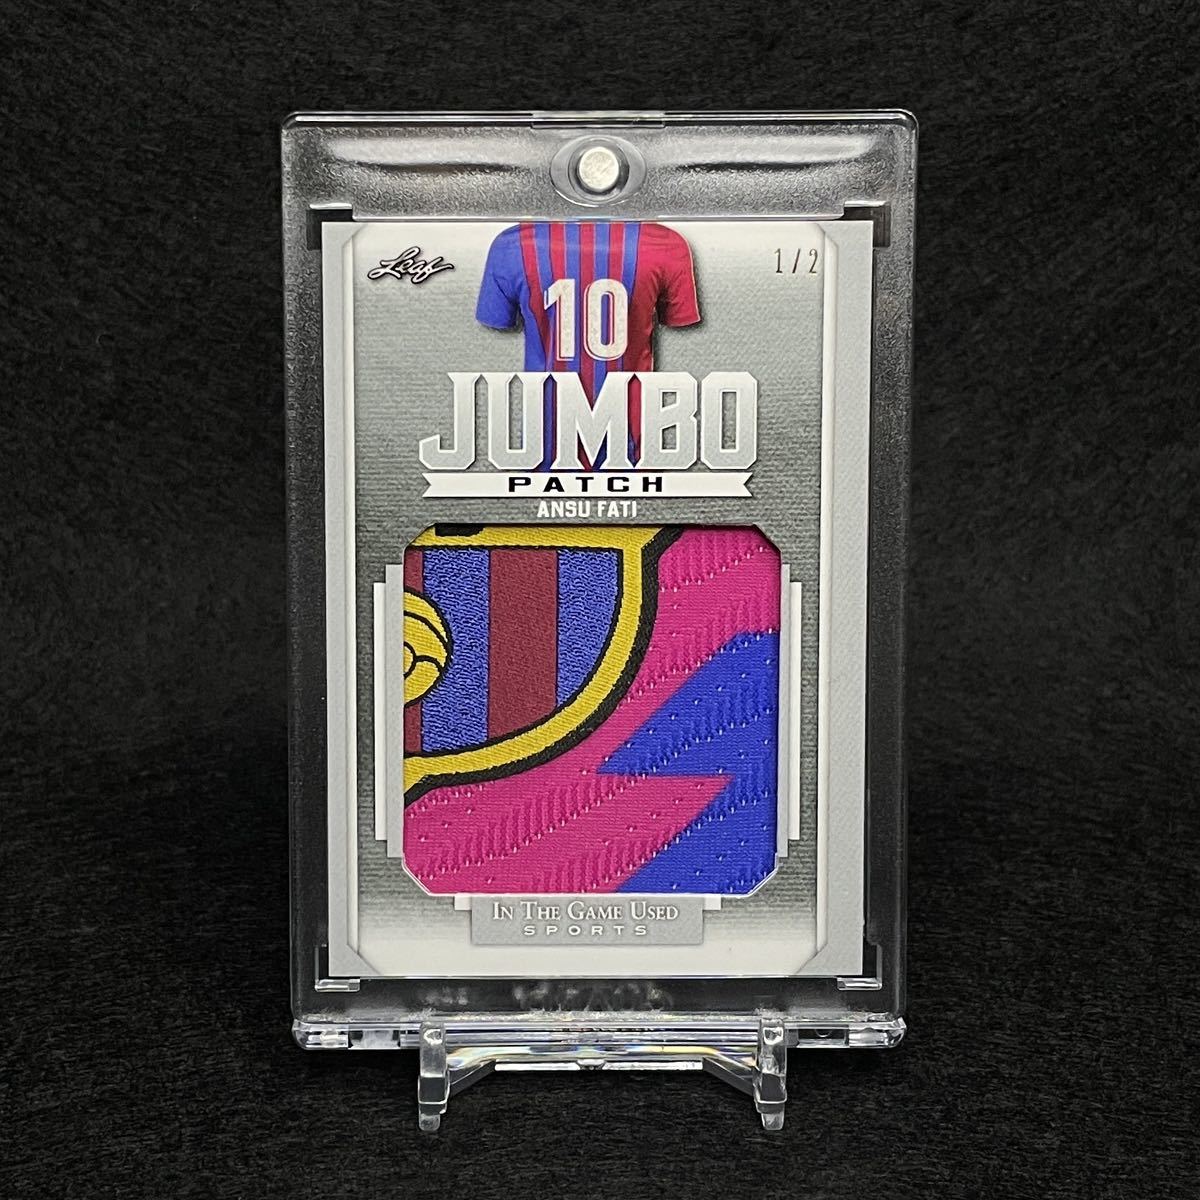 2022 Leaf In The Game Used Jumbo Patch Ansu Fati アンス・ファティ 胸ロゴパッチ部分 世界2枚限定 Game-Used topps panini soccer